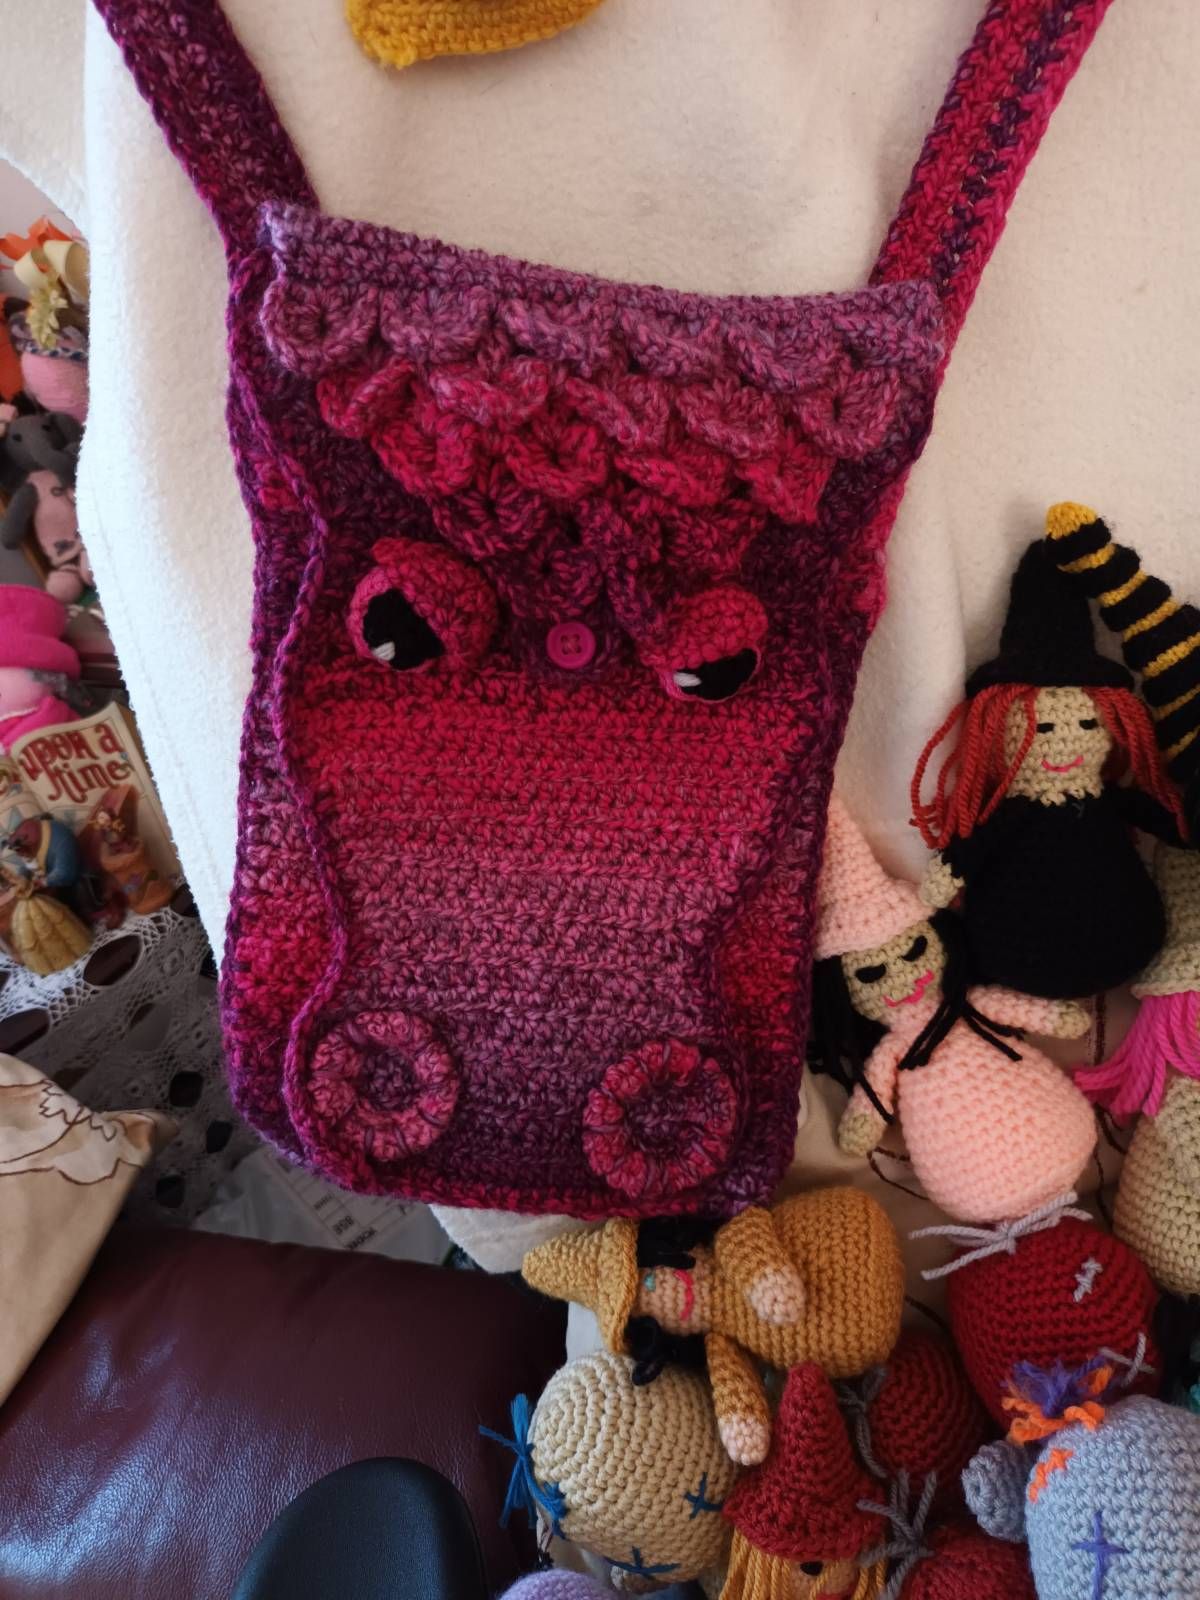 Amigurumi Dragon Crochet Bag Pattern Review by Mrs C Duwell for Cottontail and Whiskers